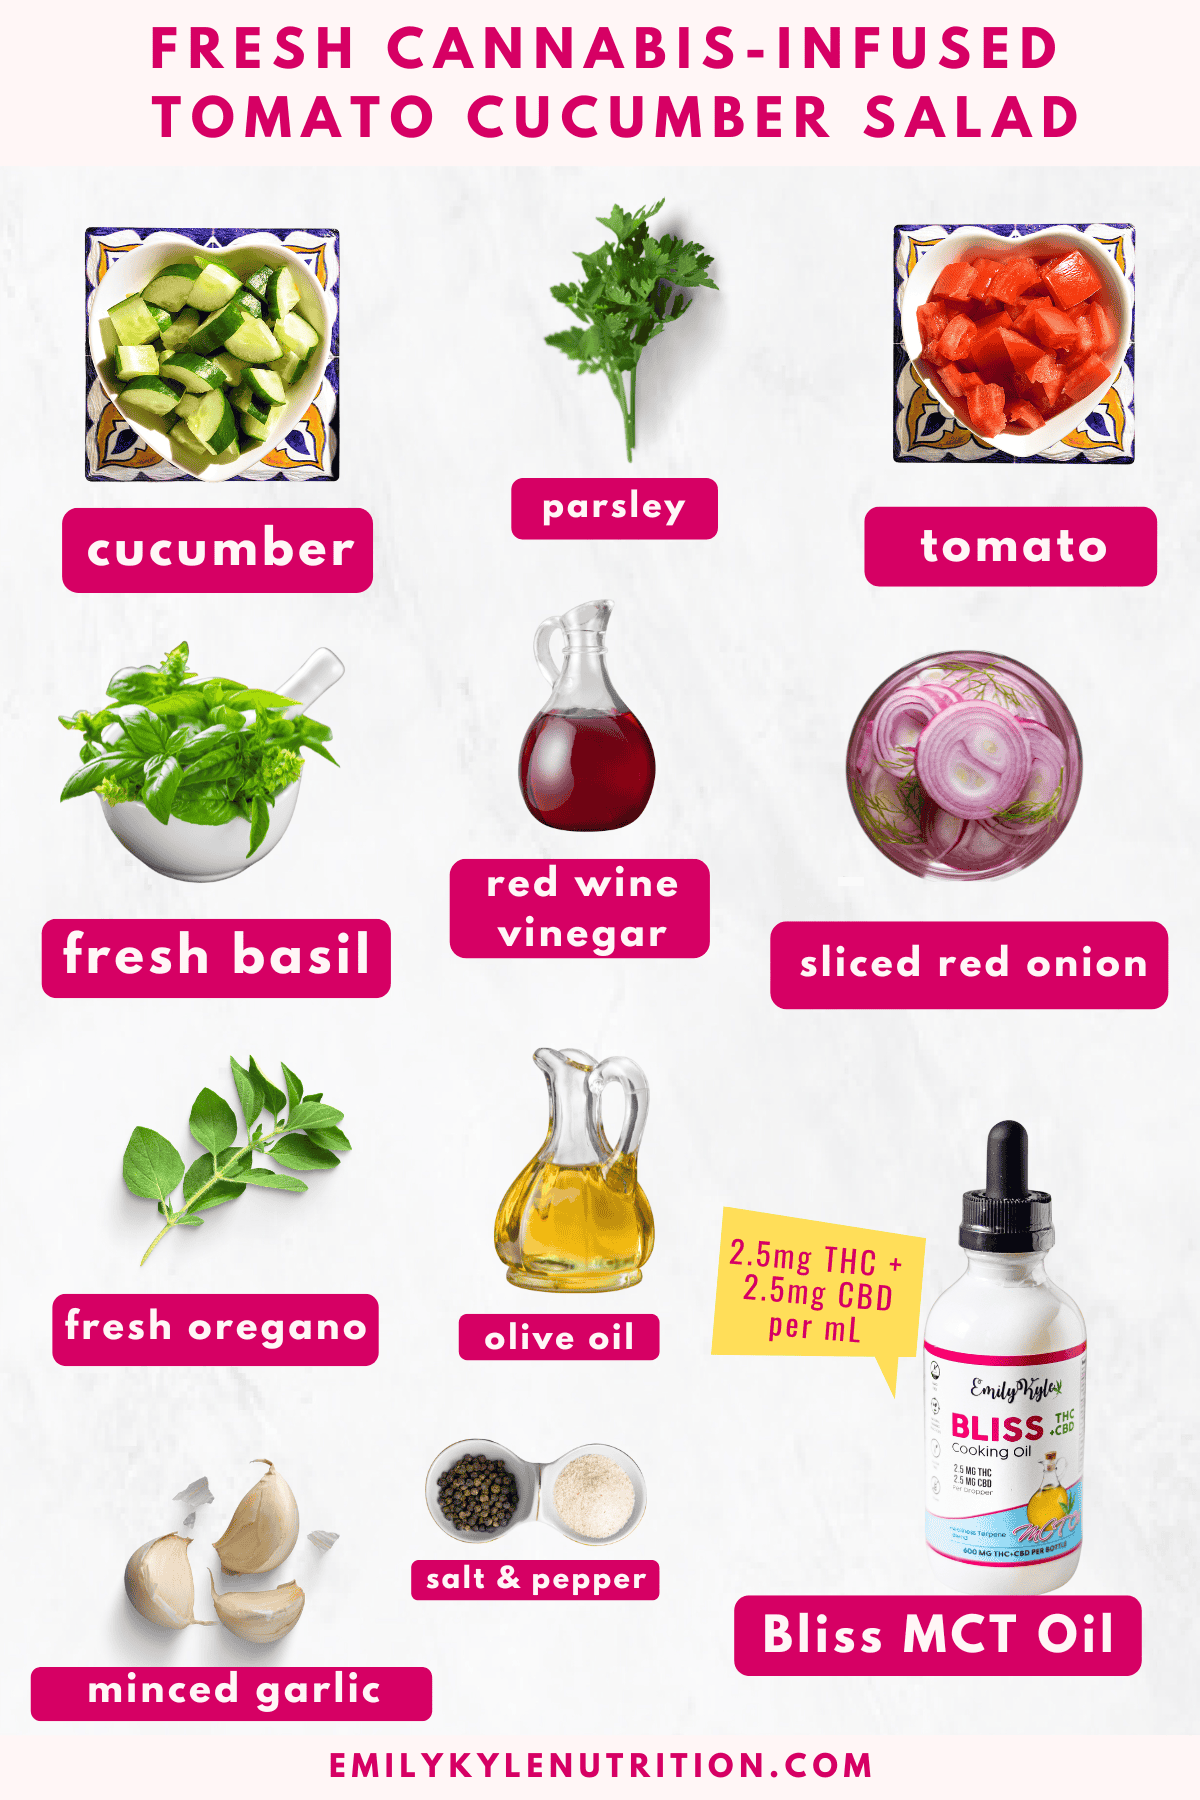 The ingredients needed to make a cannabis infused cucumber salad. 